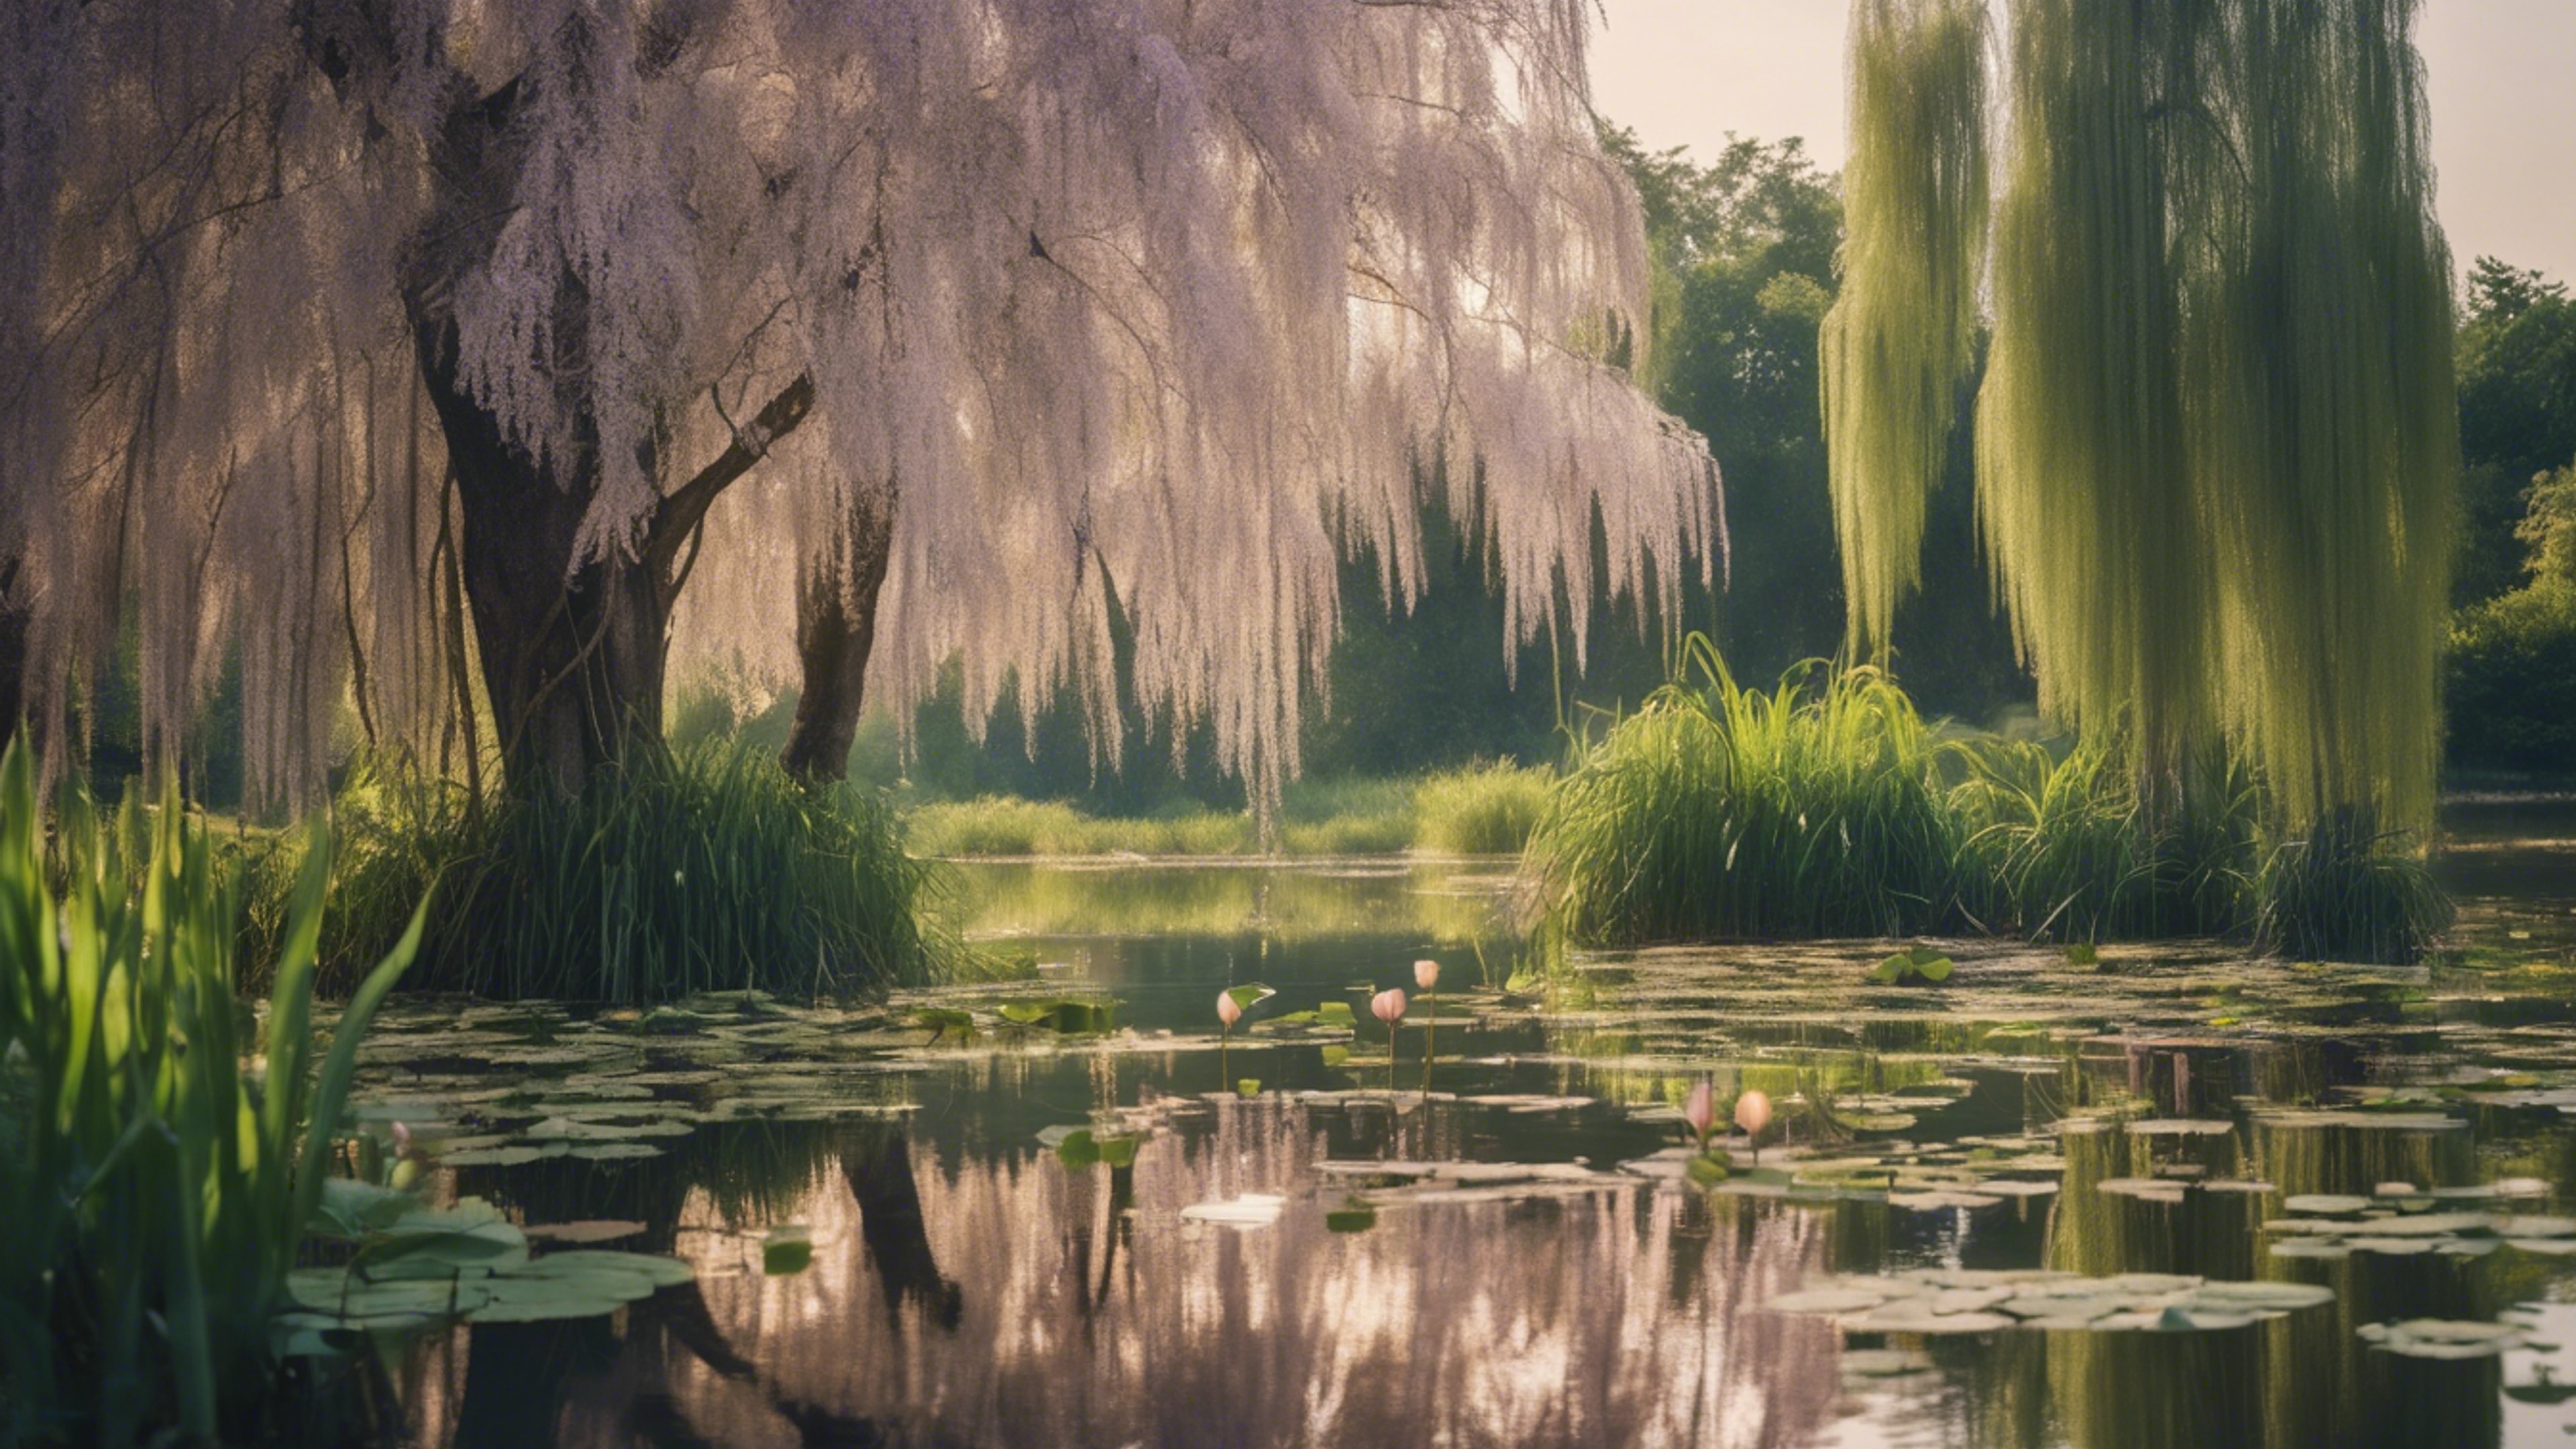 A peaceful pond surrounded by weeping willows and lotus flowers in full bloom.壁紙[40cafbccddf8445d8780]